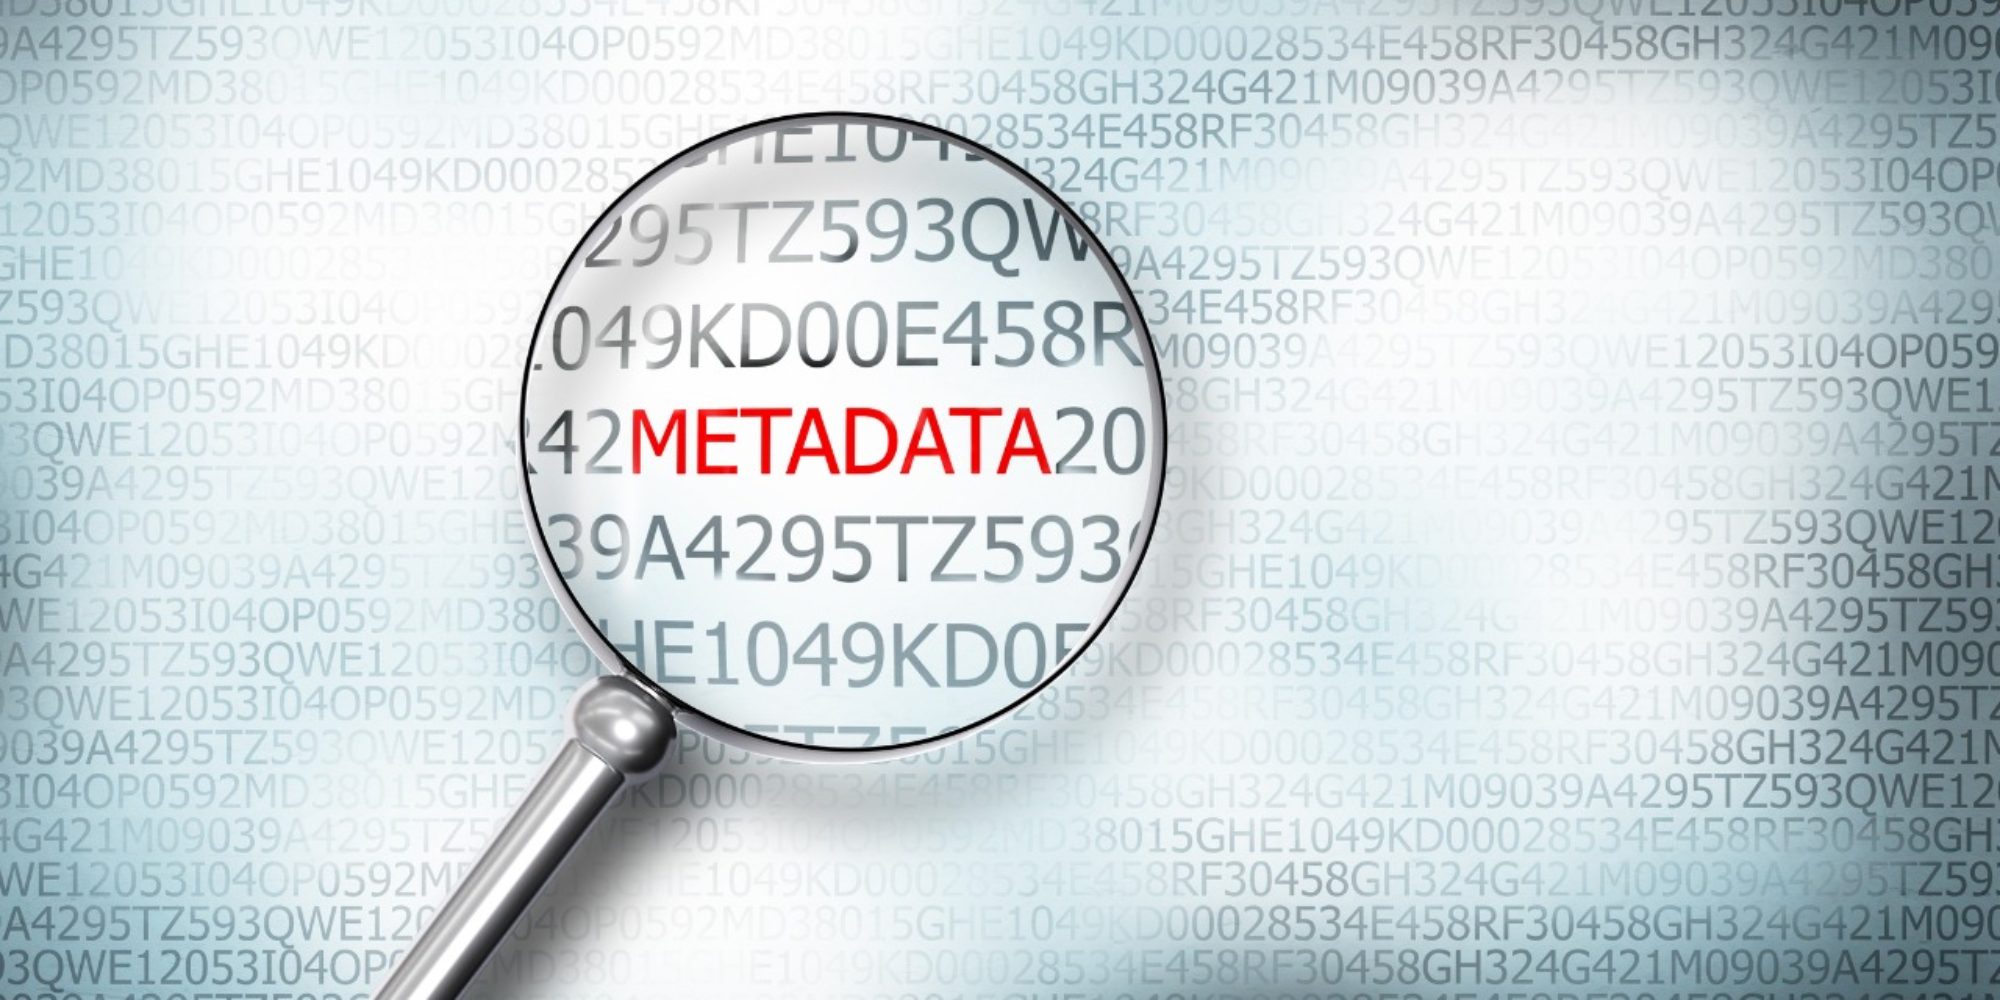 Improve Privacy by Removing Metadata from Office Documents and PDFs